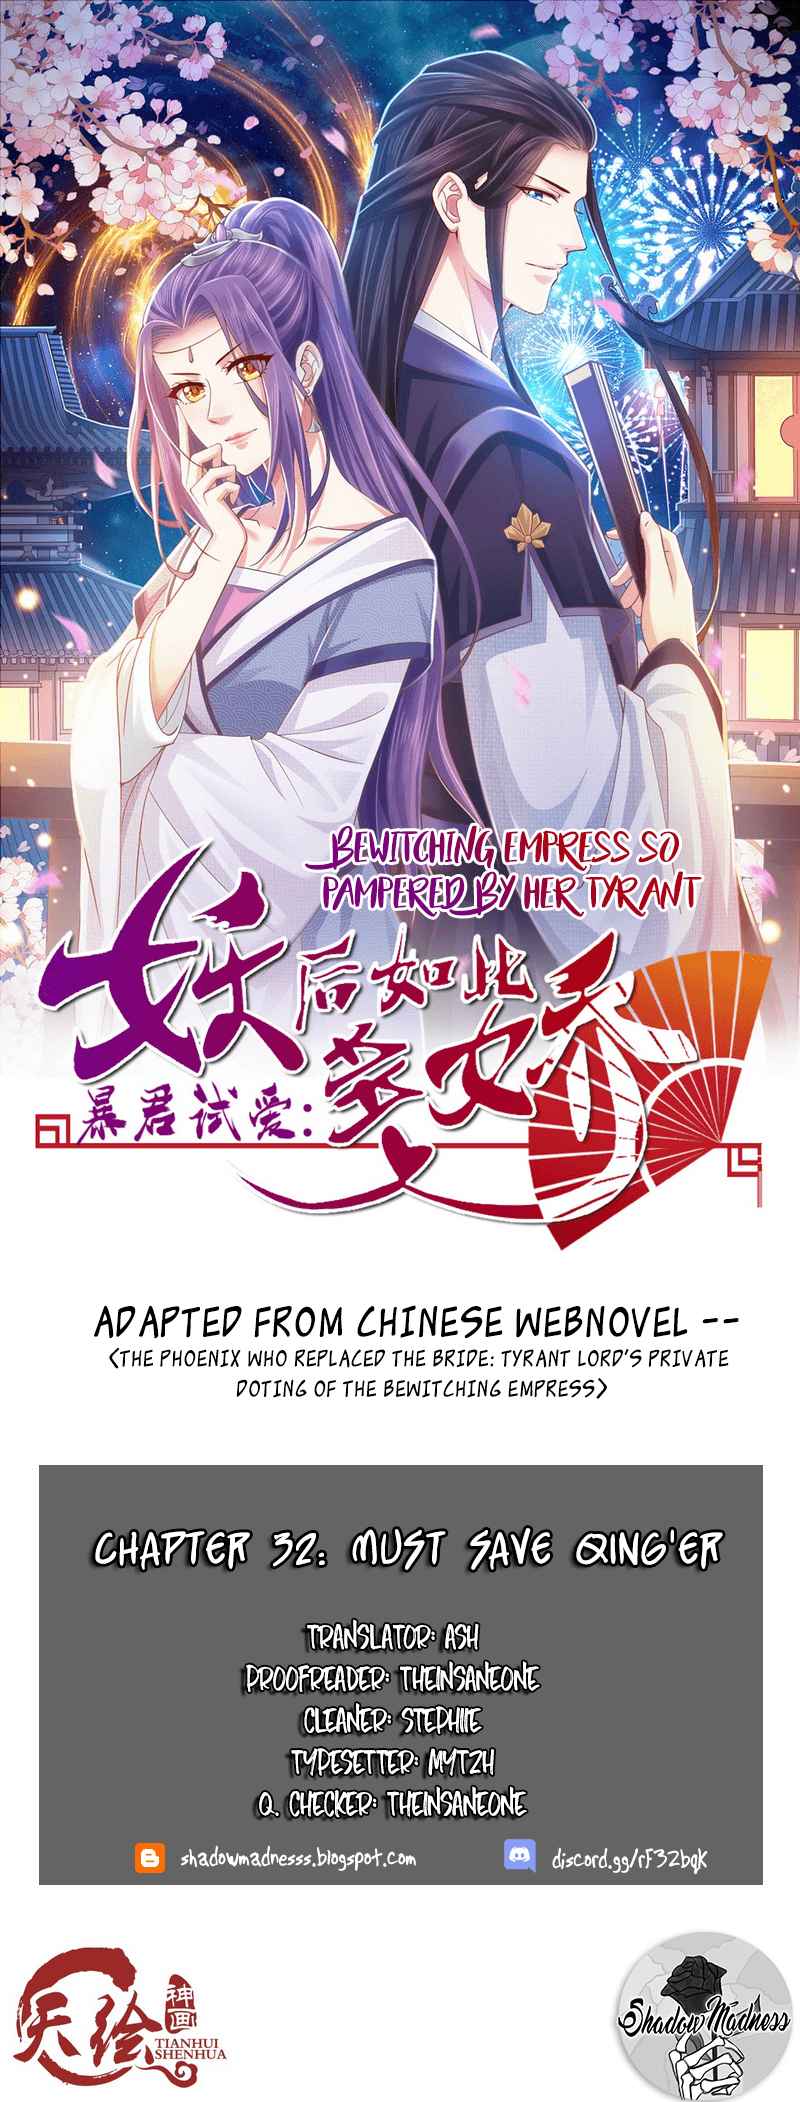 Bewitching Empress So Pampered by Her Tyrant Ch. 32 Must save Qing’er